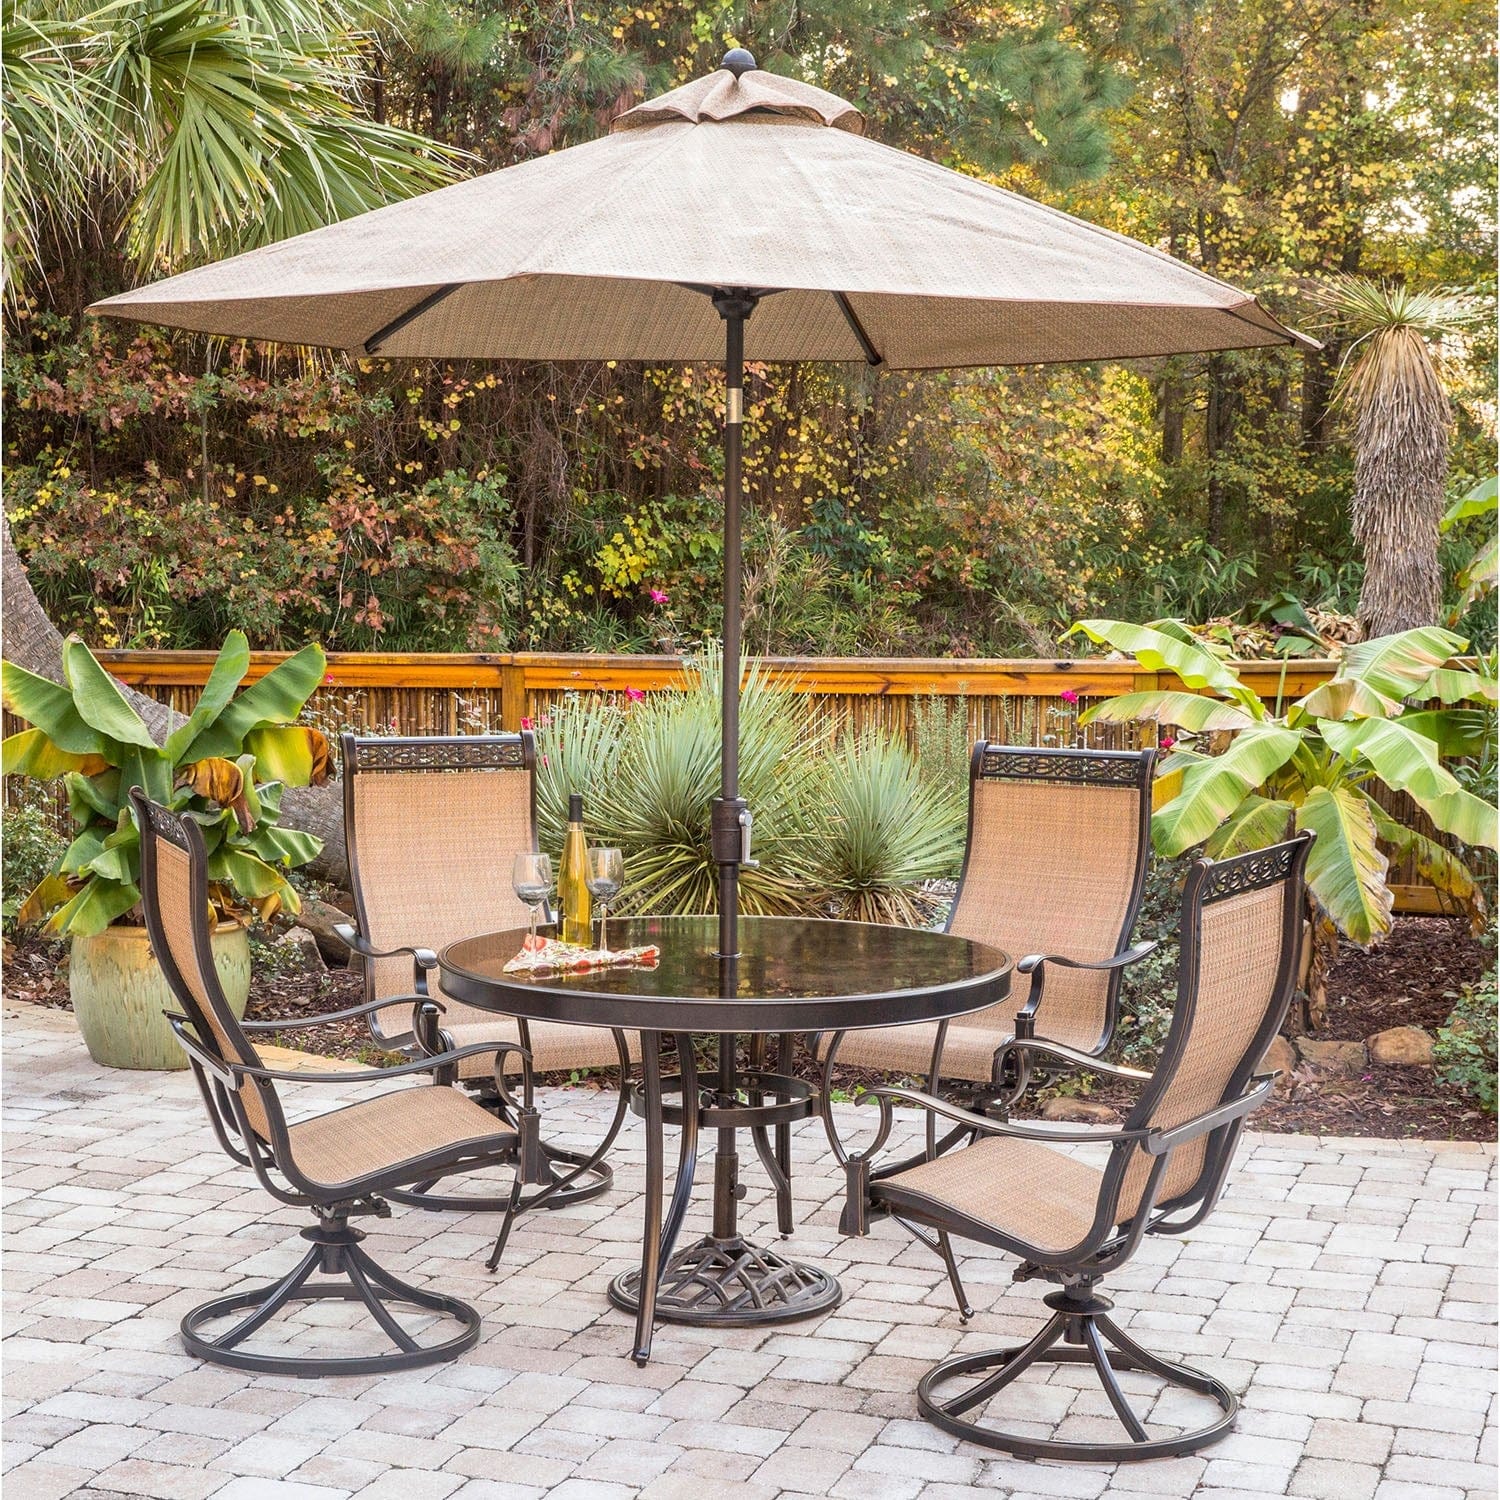 Hanover Outdoor Dining Set Hanover Monaco 5-Piece Dining Set with Swivel Sling Chairs, Glass-top Dining Table, 9 Ft. Table Umbrella, and Umbrella Stand | MONDN5PCSWG-SU